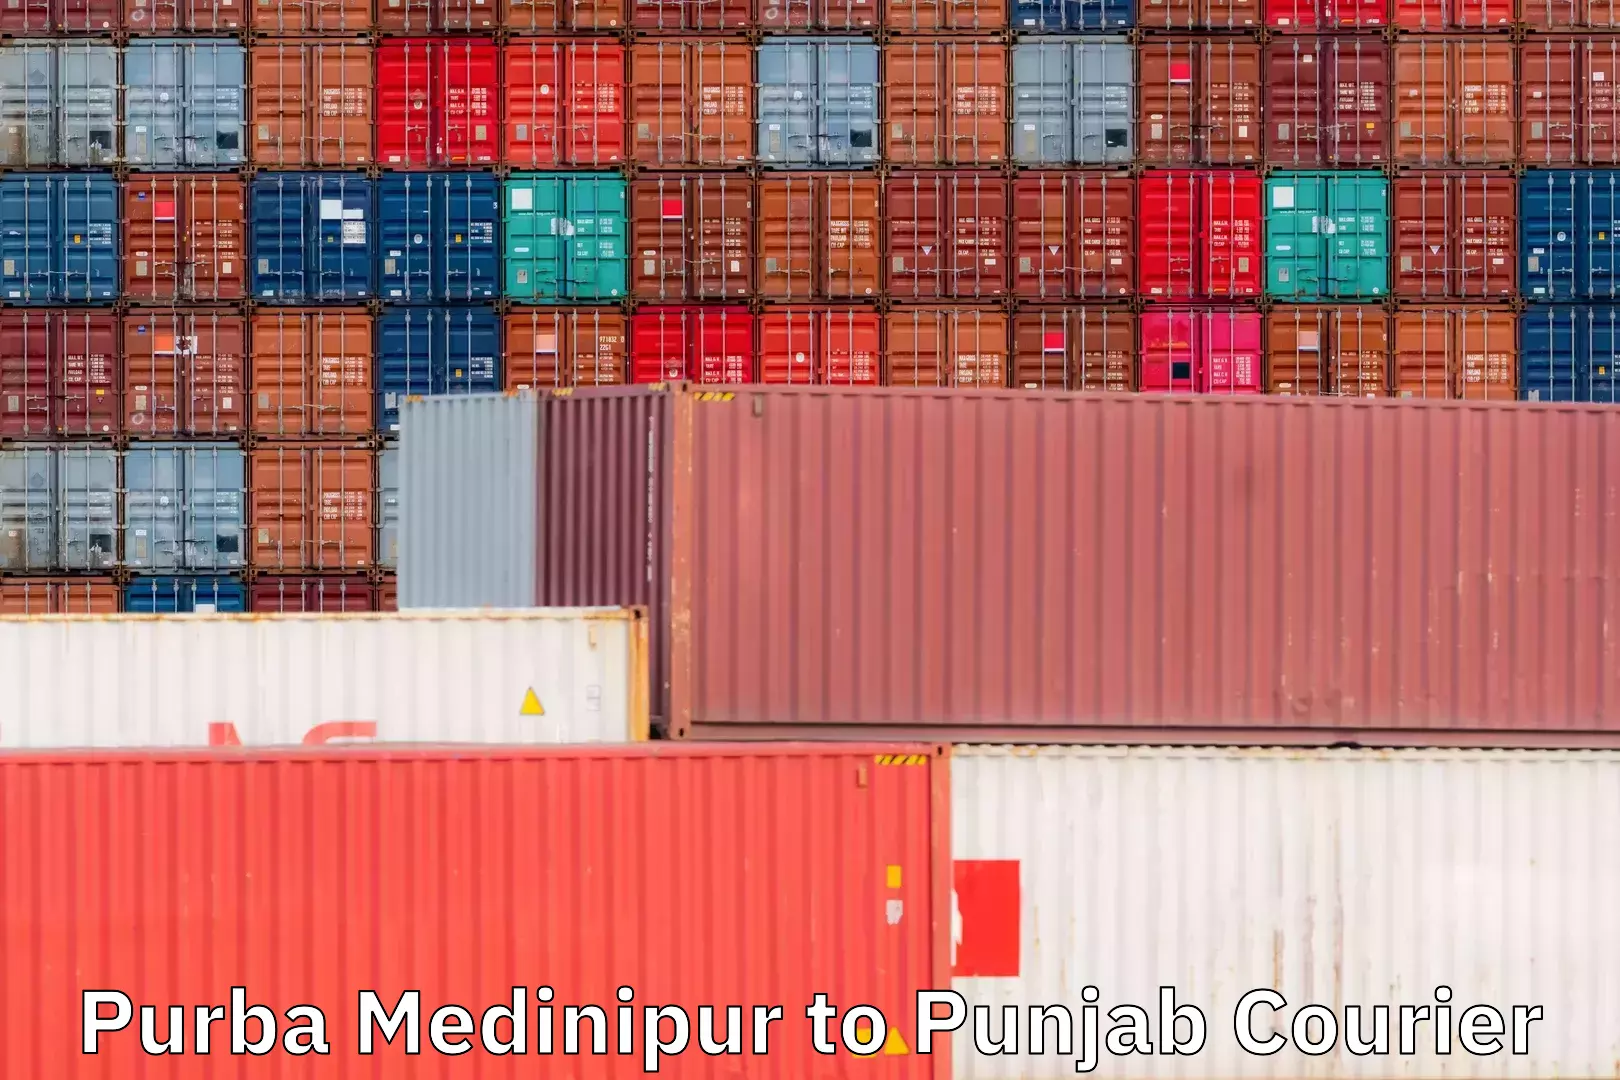 Expedited parcel delivery Purba Medinipur to Punjab